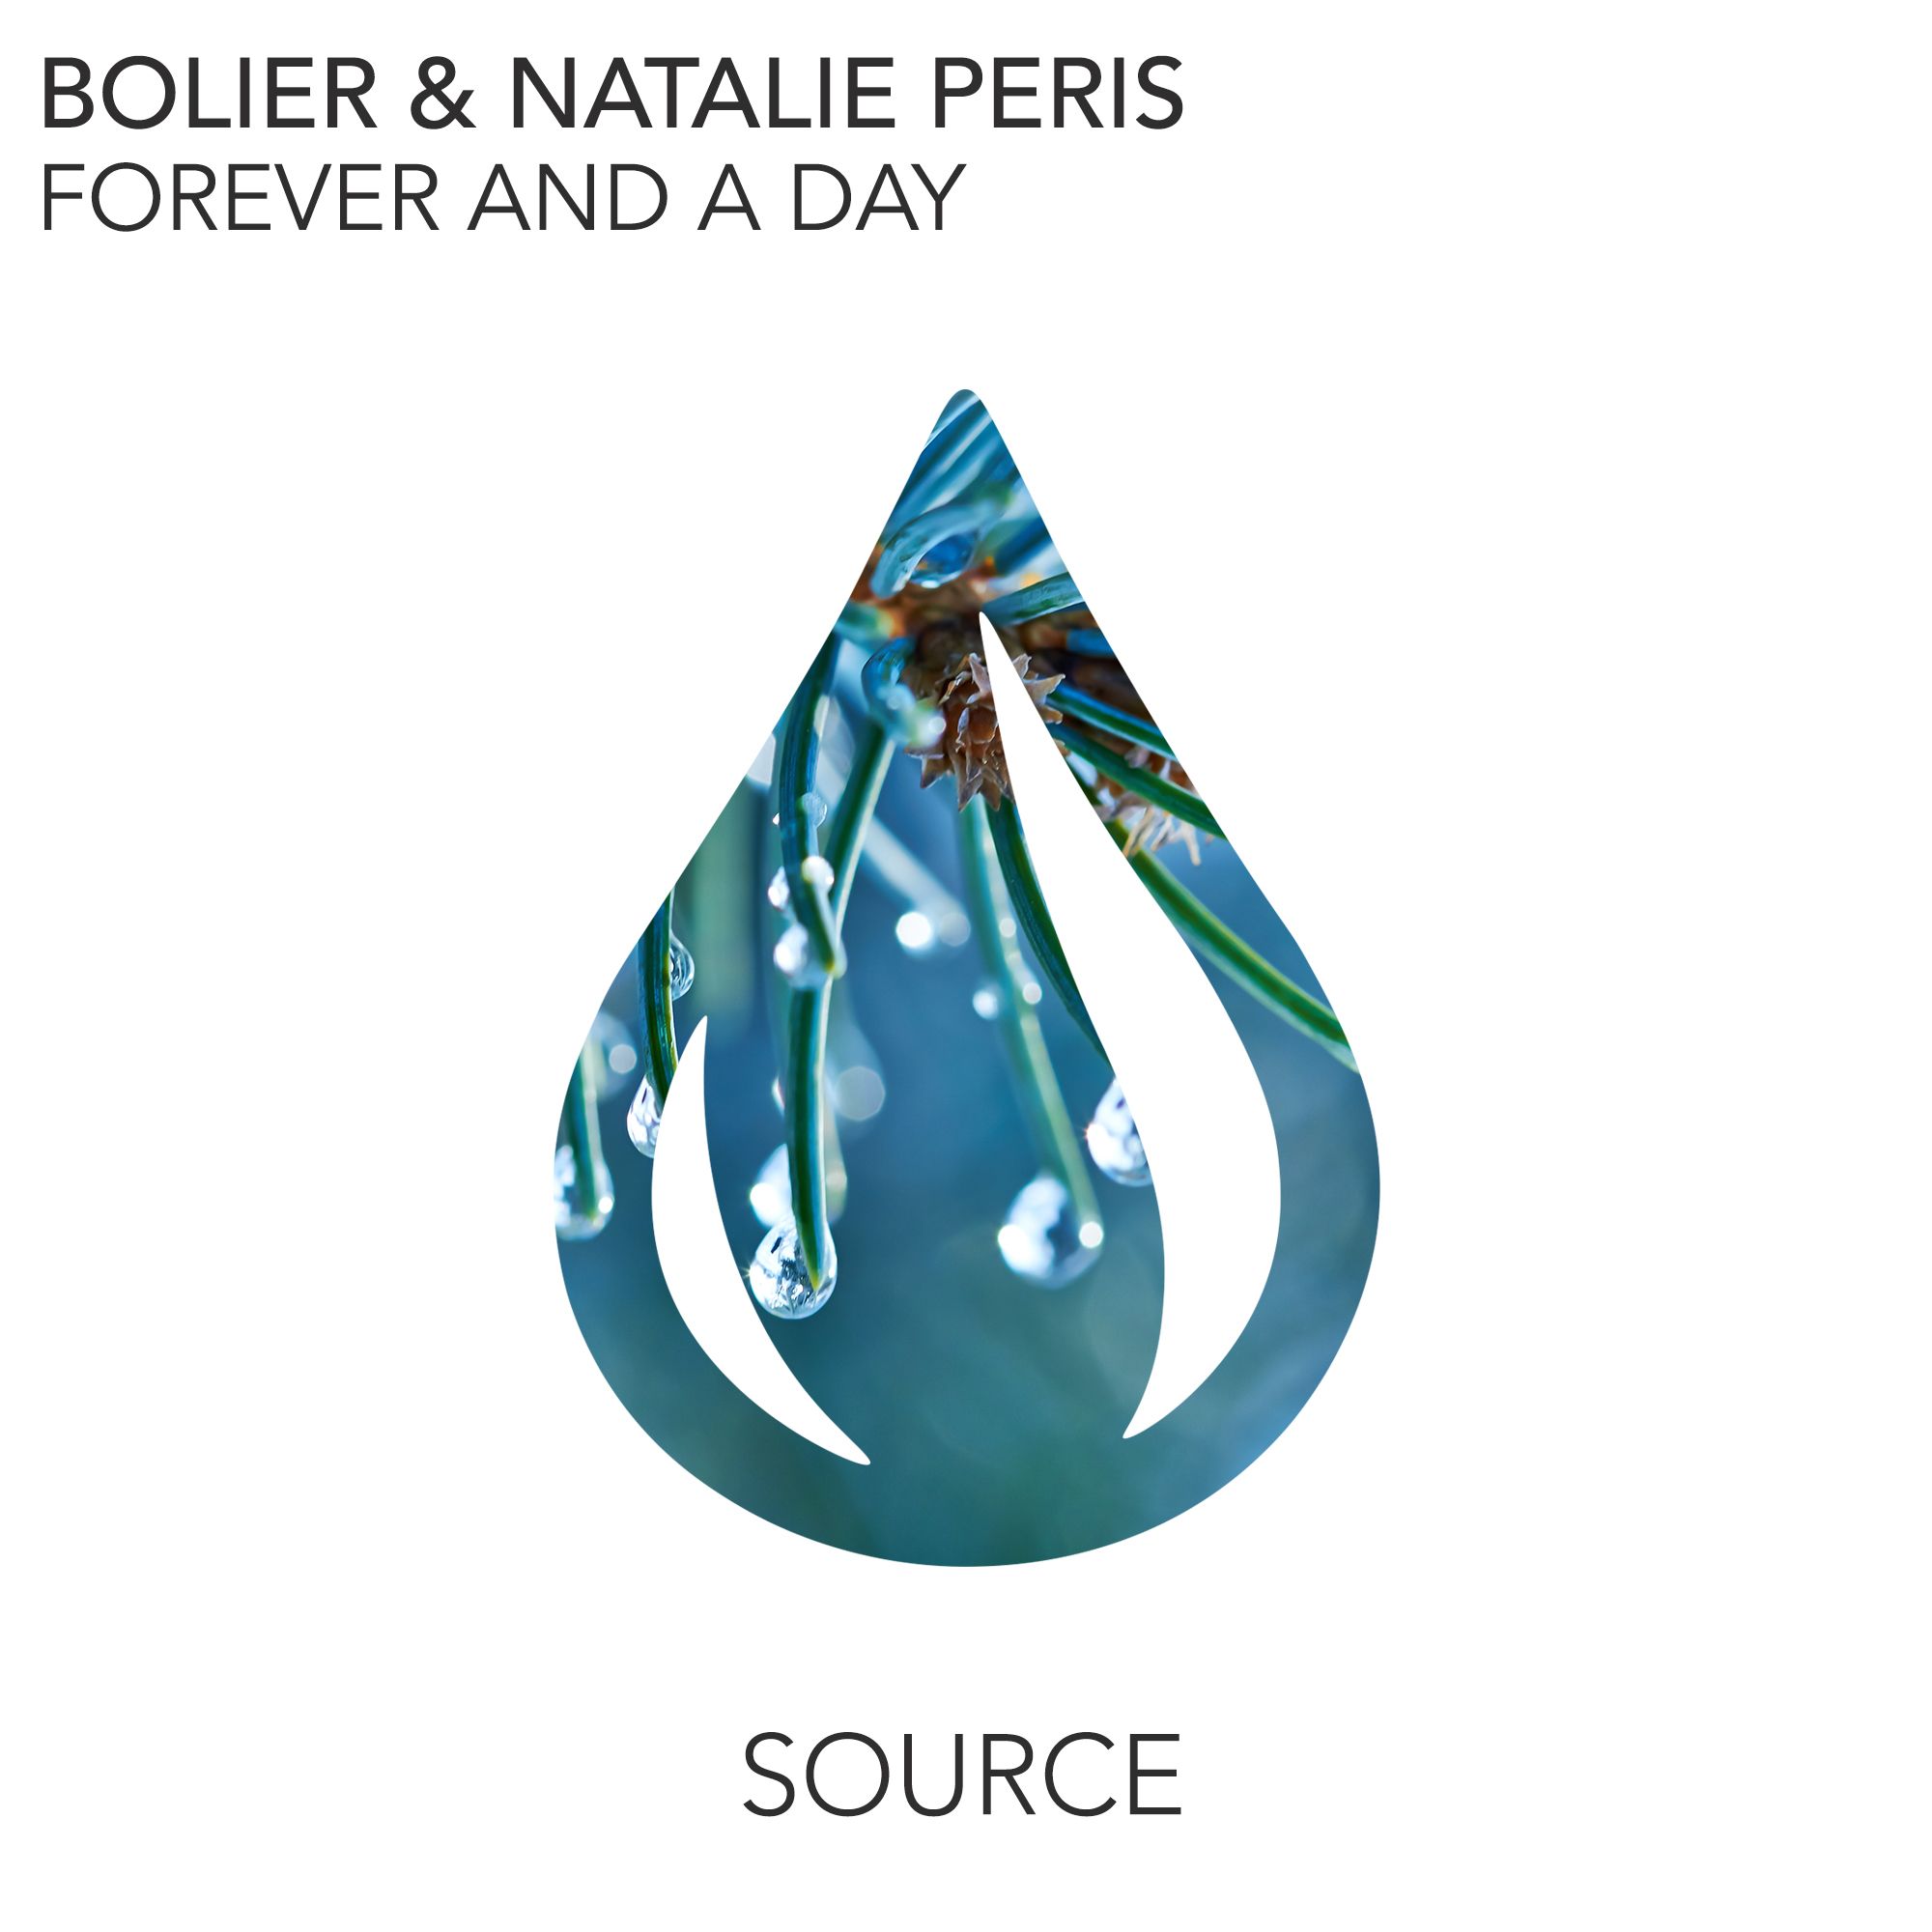 source_bolier_natalie_peris_-_forever_and_a_day.jpg